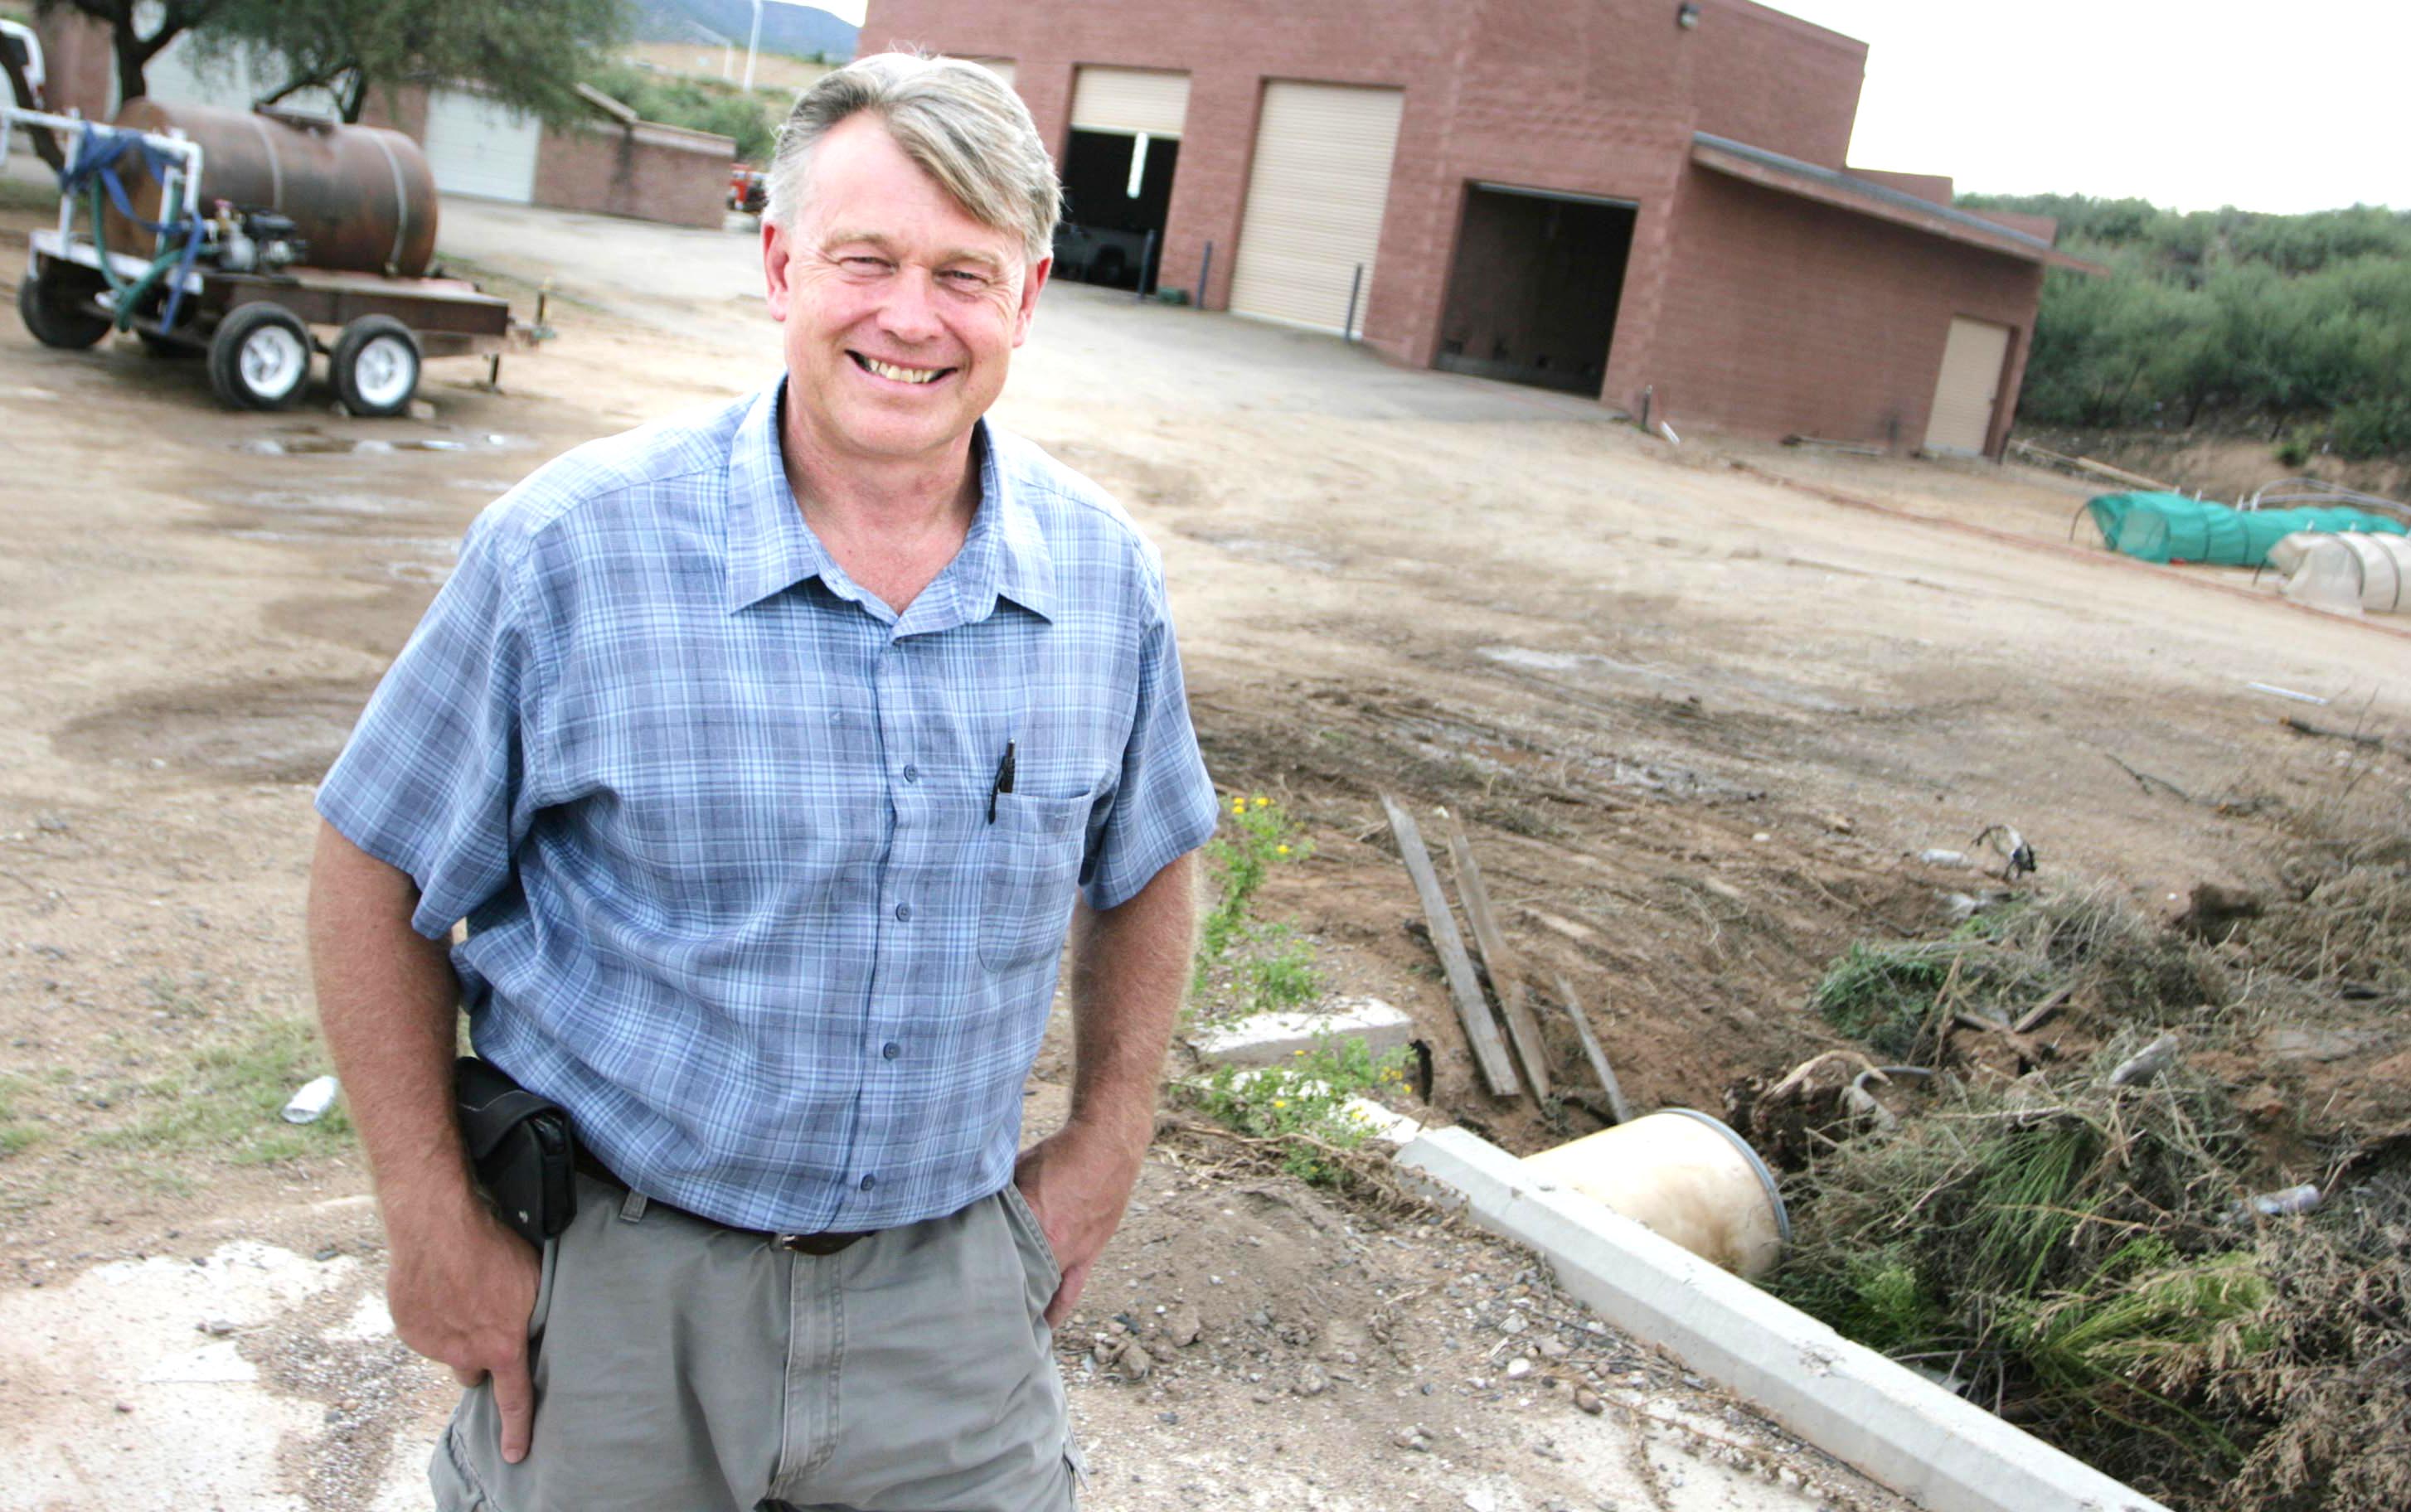 Sedona resident to grow hemp on Old Highway 279 | The Verde Independent ...